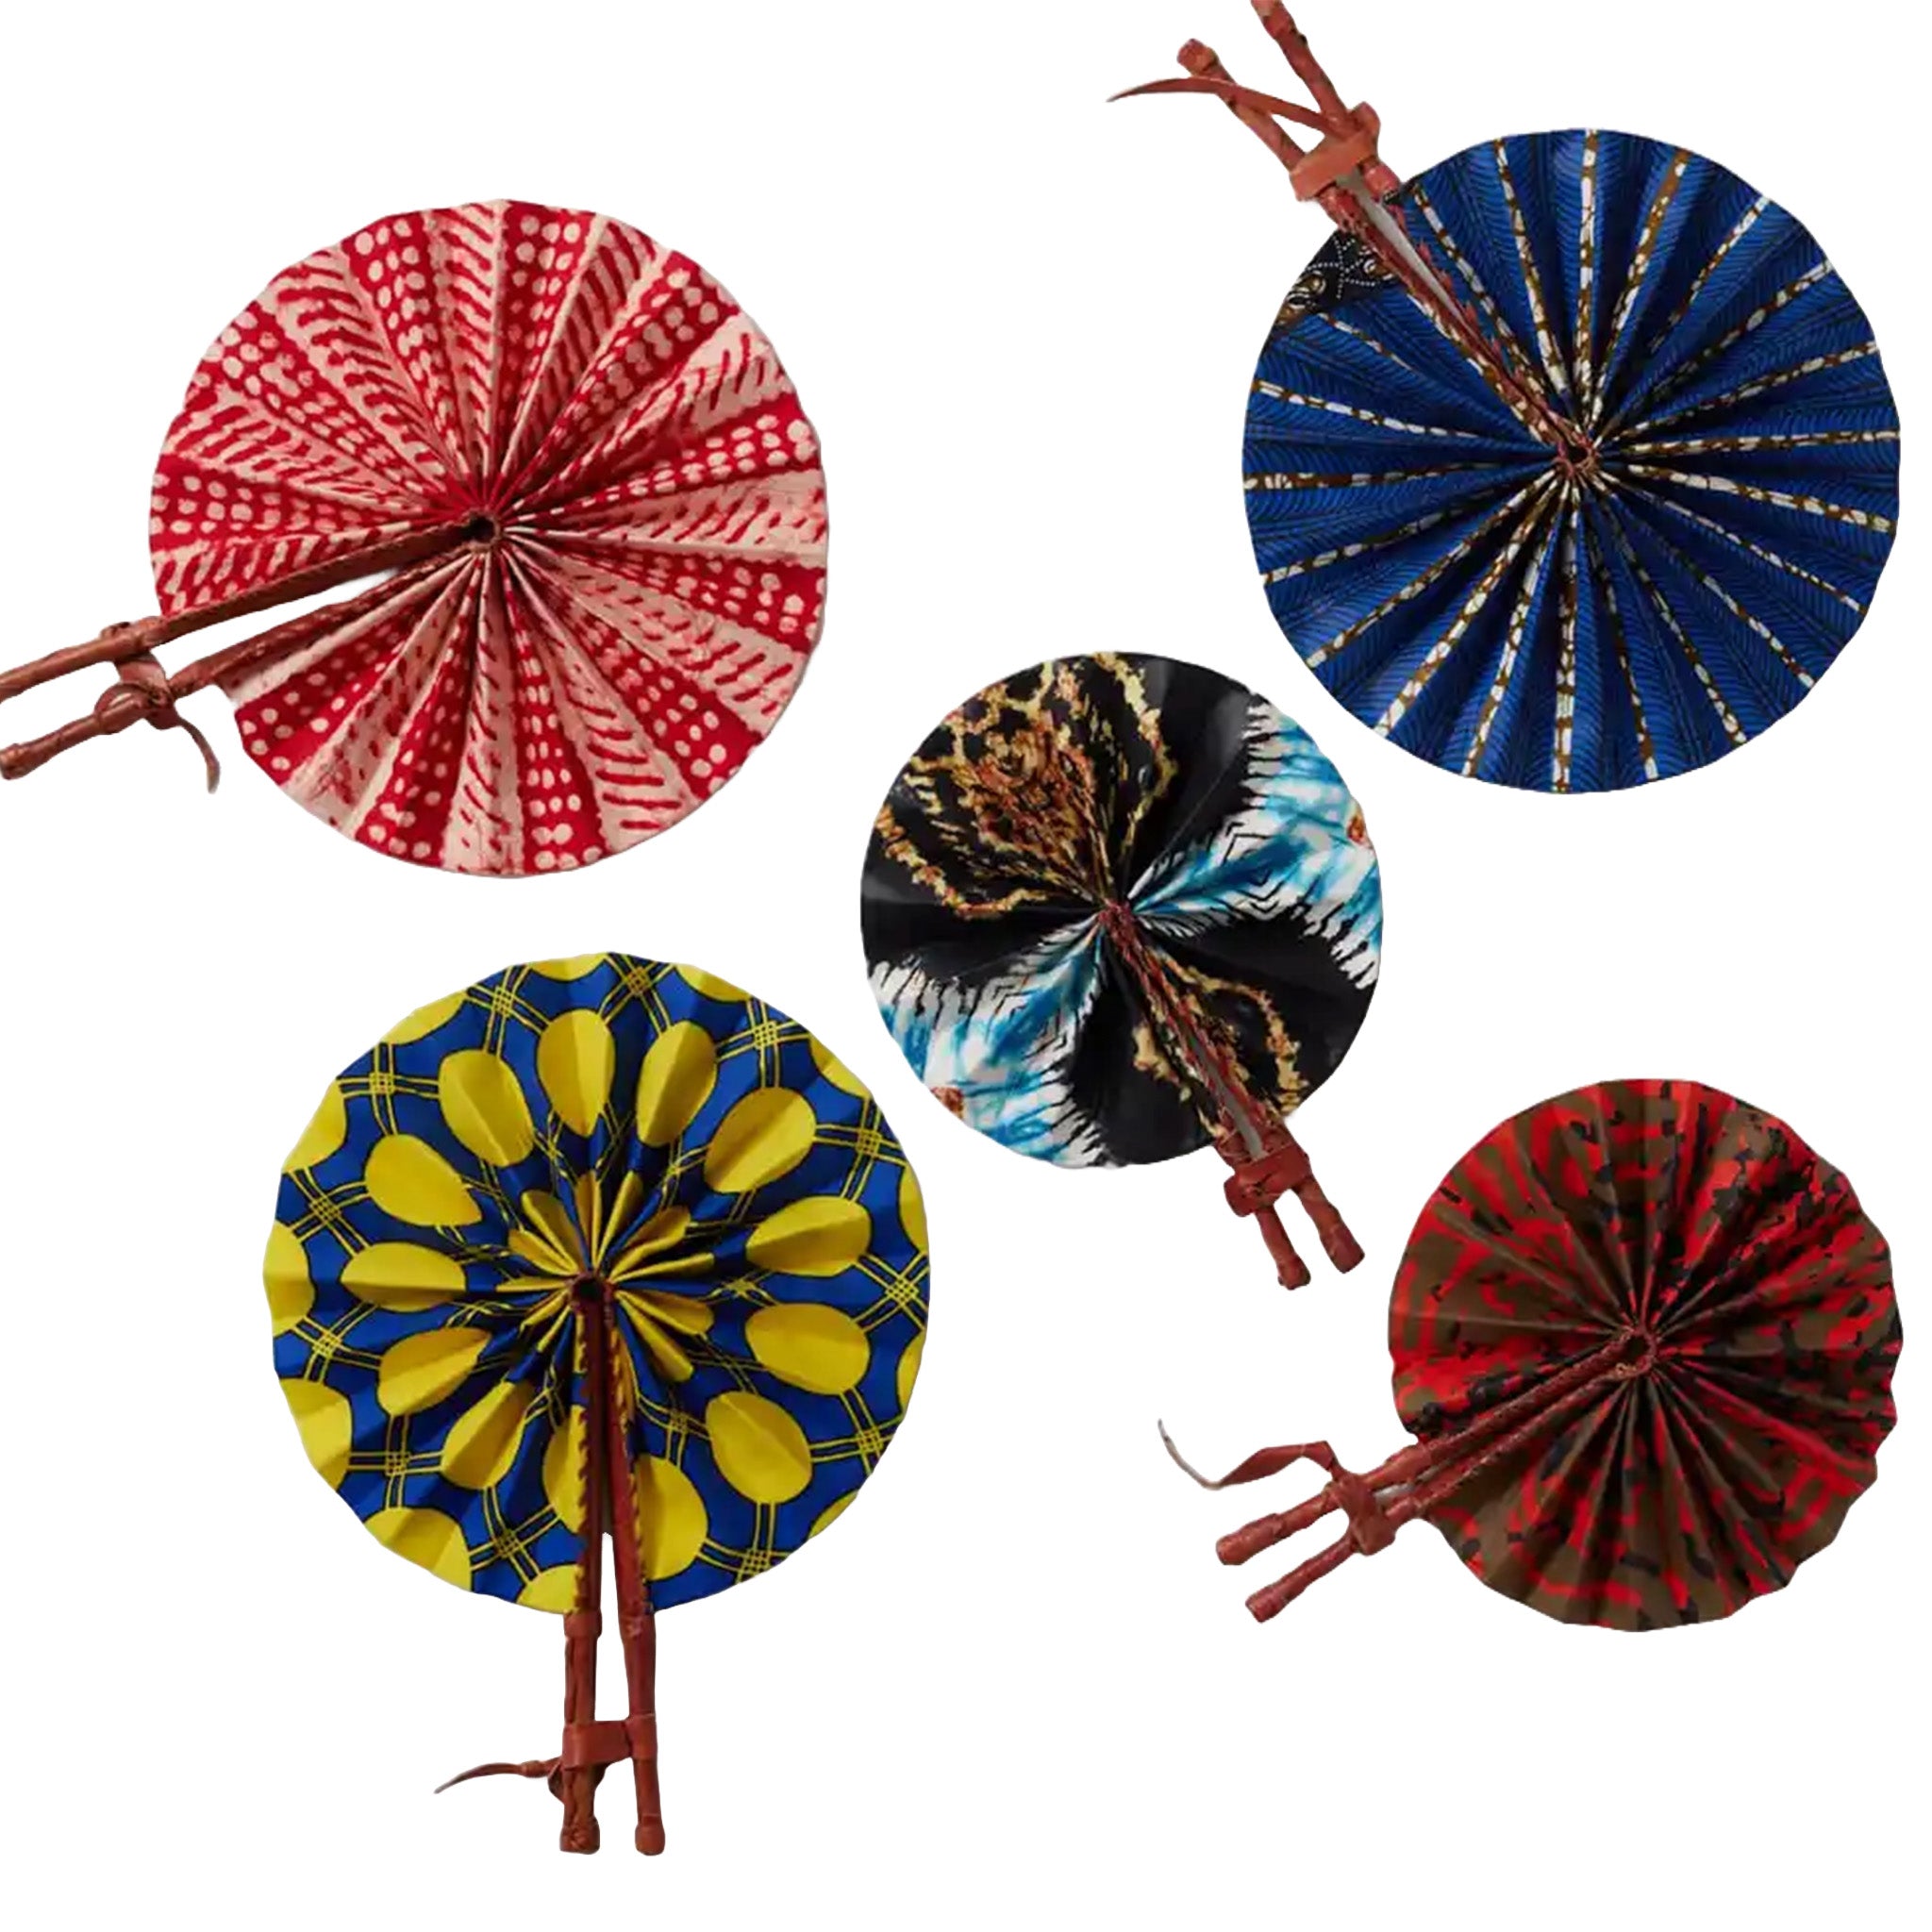 A collage of five African mini fans, each with a unique design, displayed against a white background. The fans are open, showcasing vibrant patterns: one with red and white geometric shapes, another with blue and gold stripes, a third with black and multi-colored abstract design, a fourth with bold yellow pods on blue, and the last with red and black animal print. All have wooden handles with leather thongs for hanging.